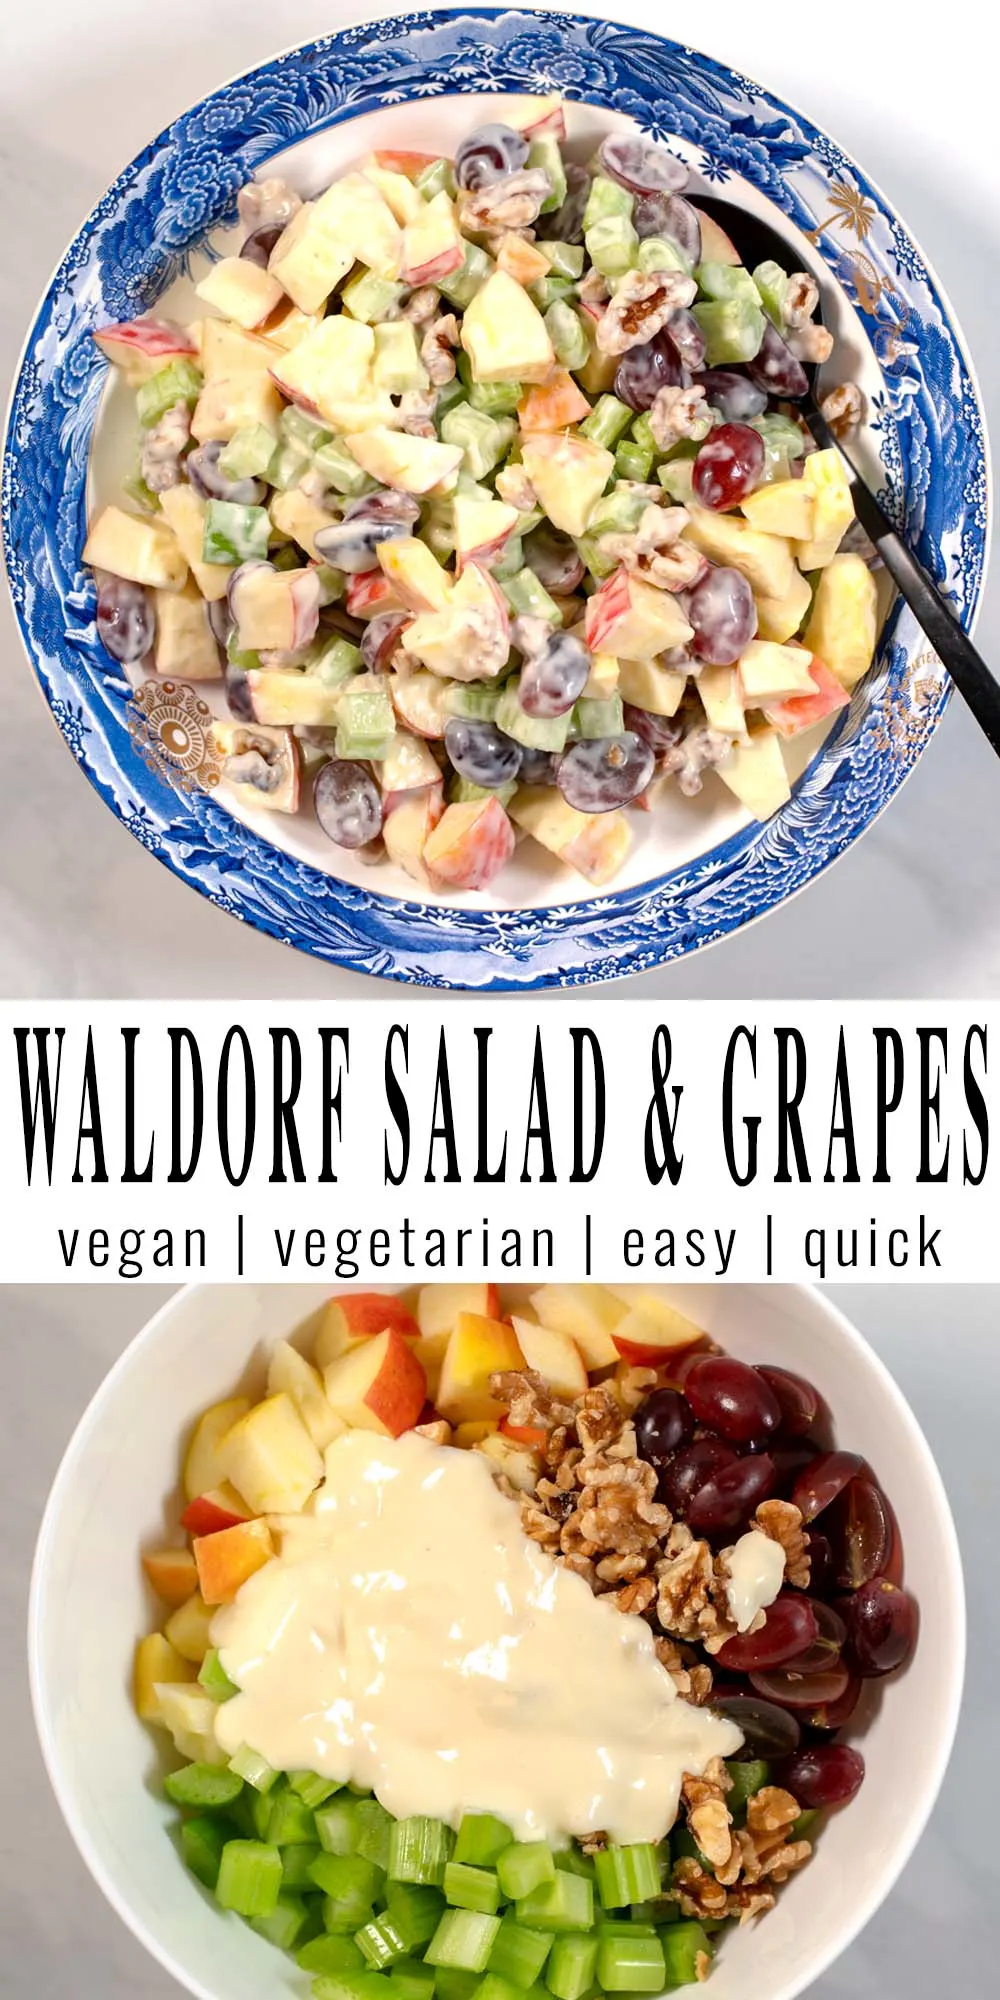 Collage of two photos showing the Waldorf Salad with grapes.